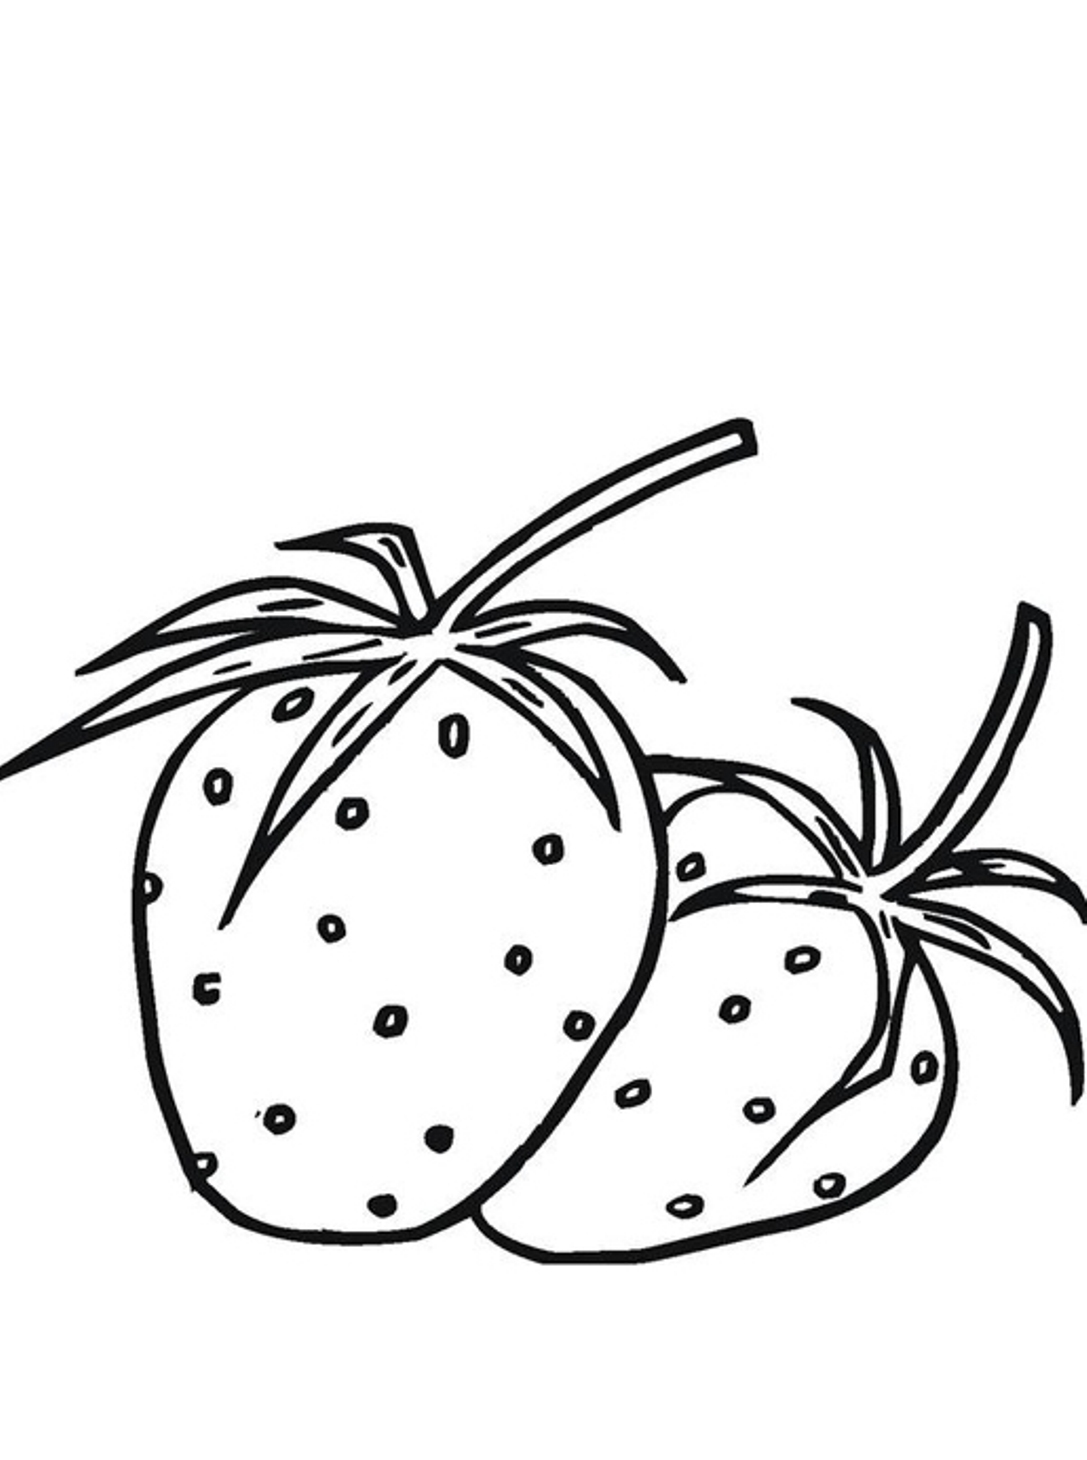 Two Strawberry Fruit Se125 Coloring Page